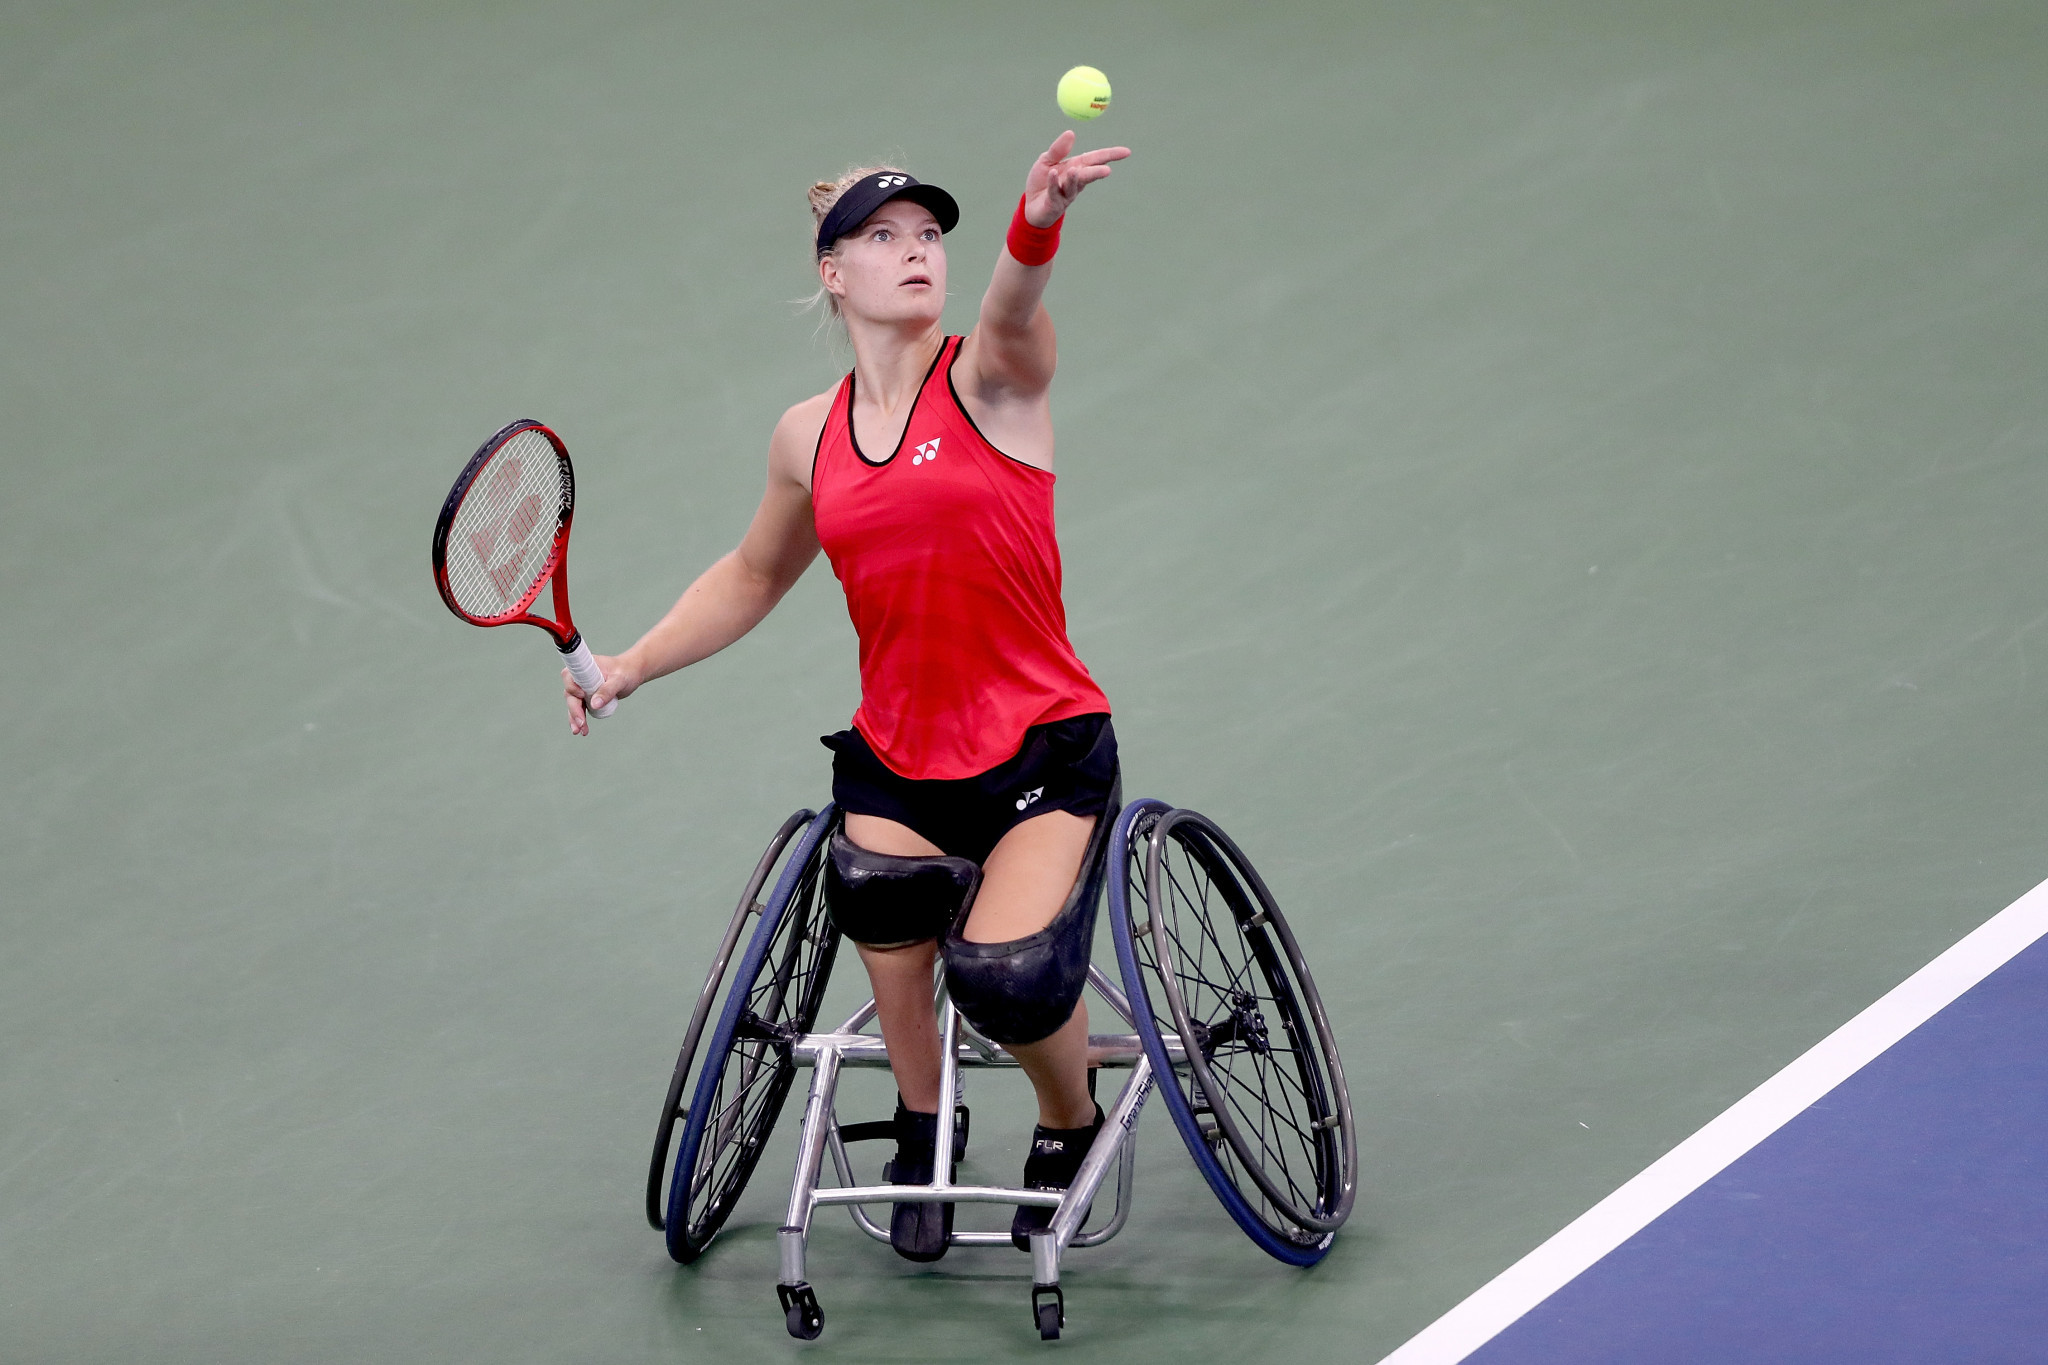 The Netherlands' Diede de Groot won singles titles of all four majors as well as the Tokyo 2020 Paralympic Games ©Getty Images